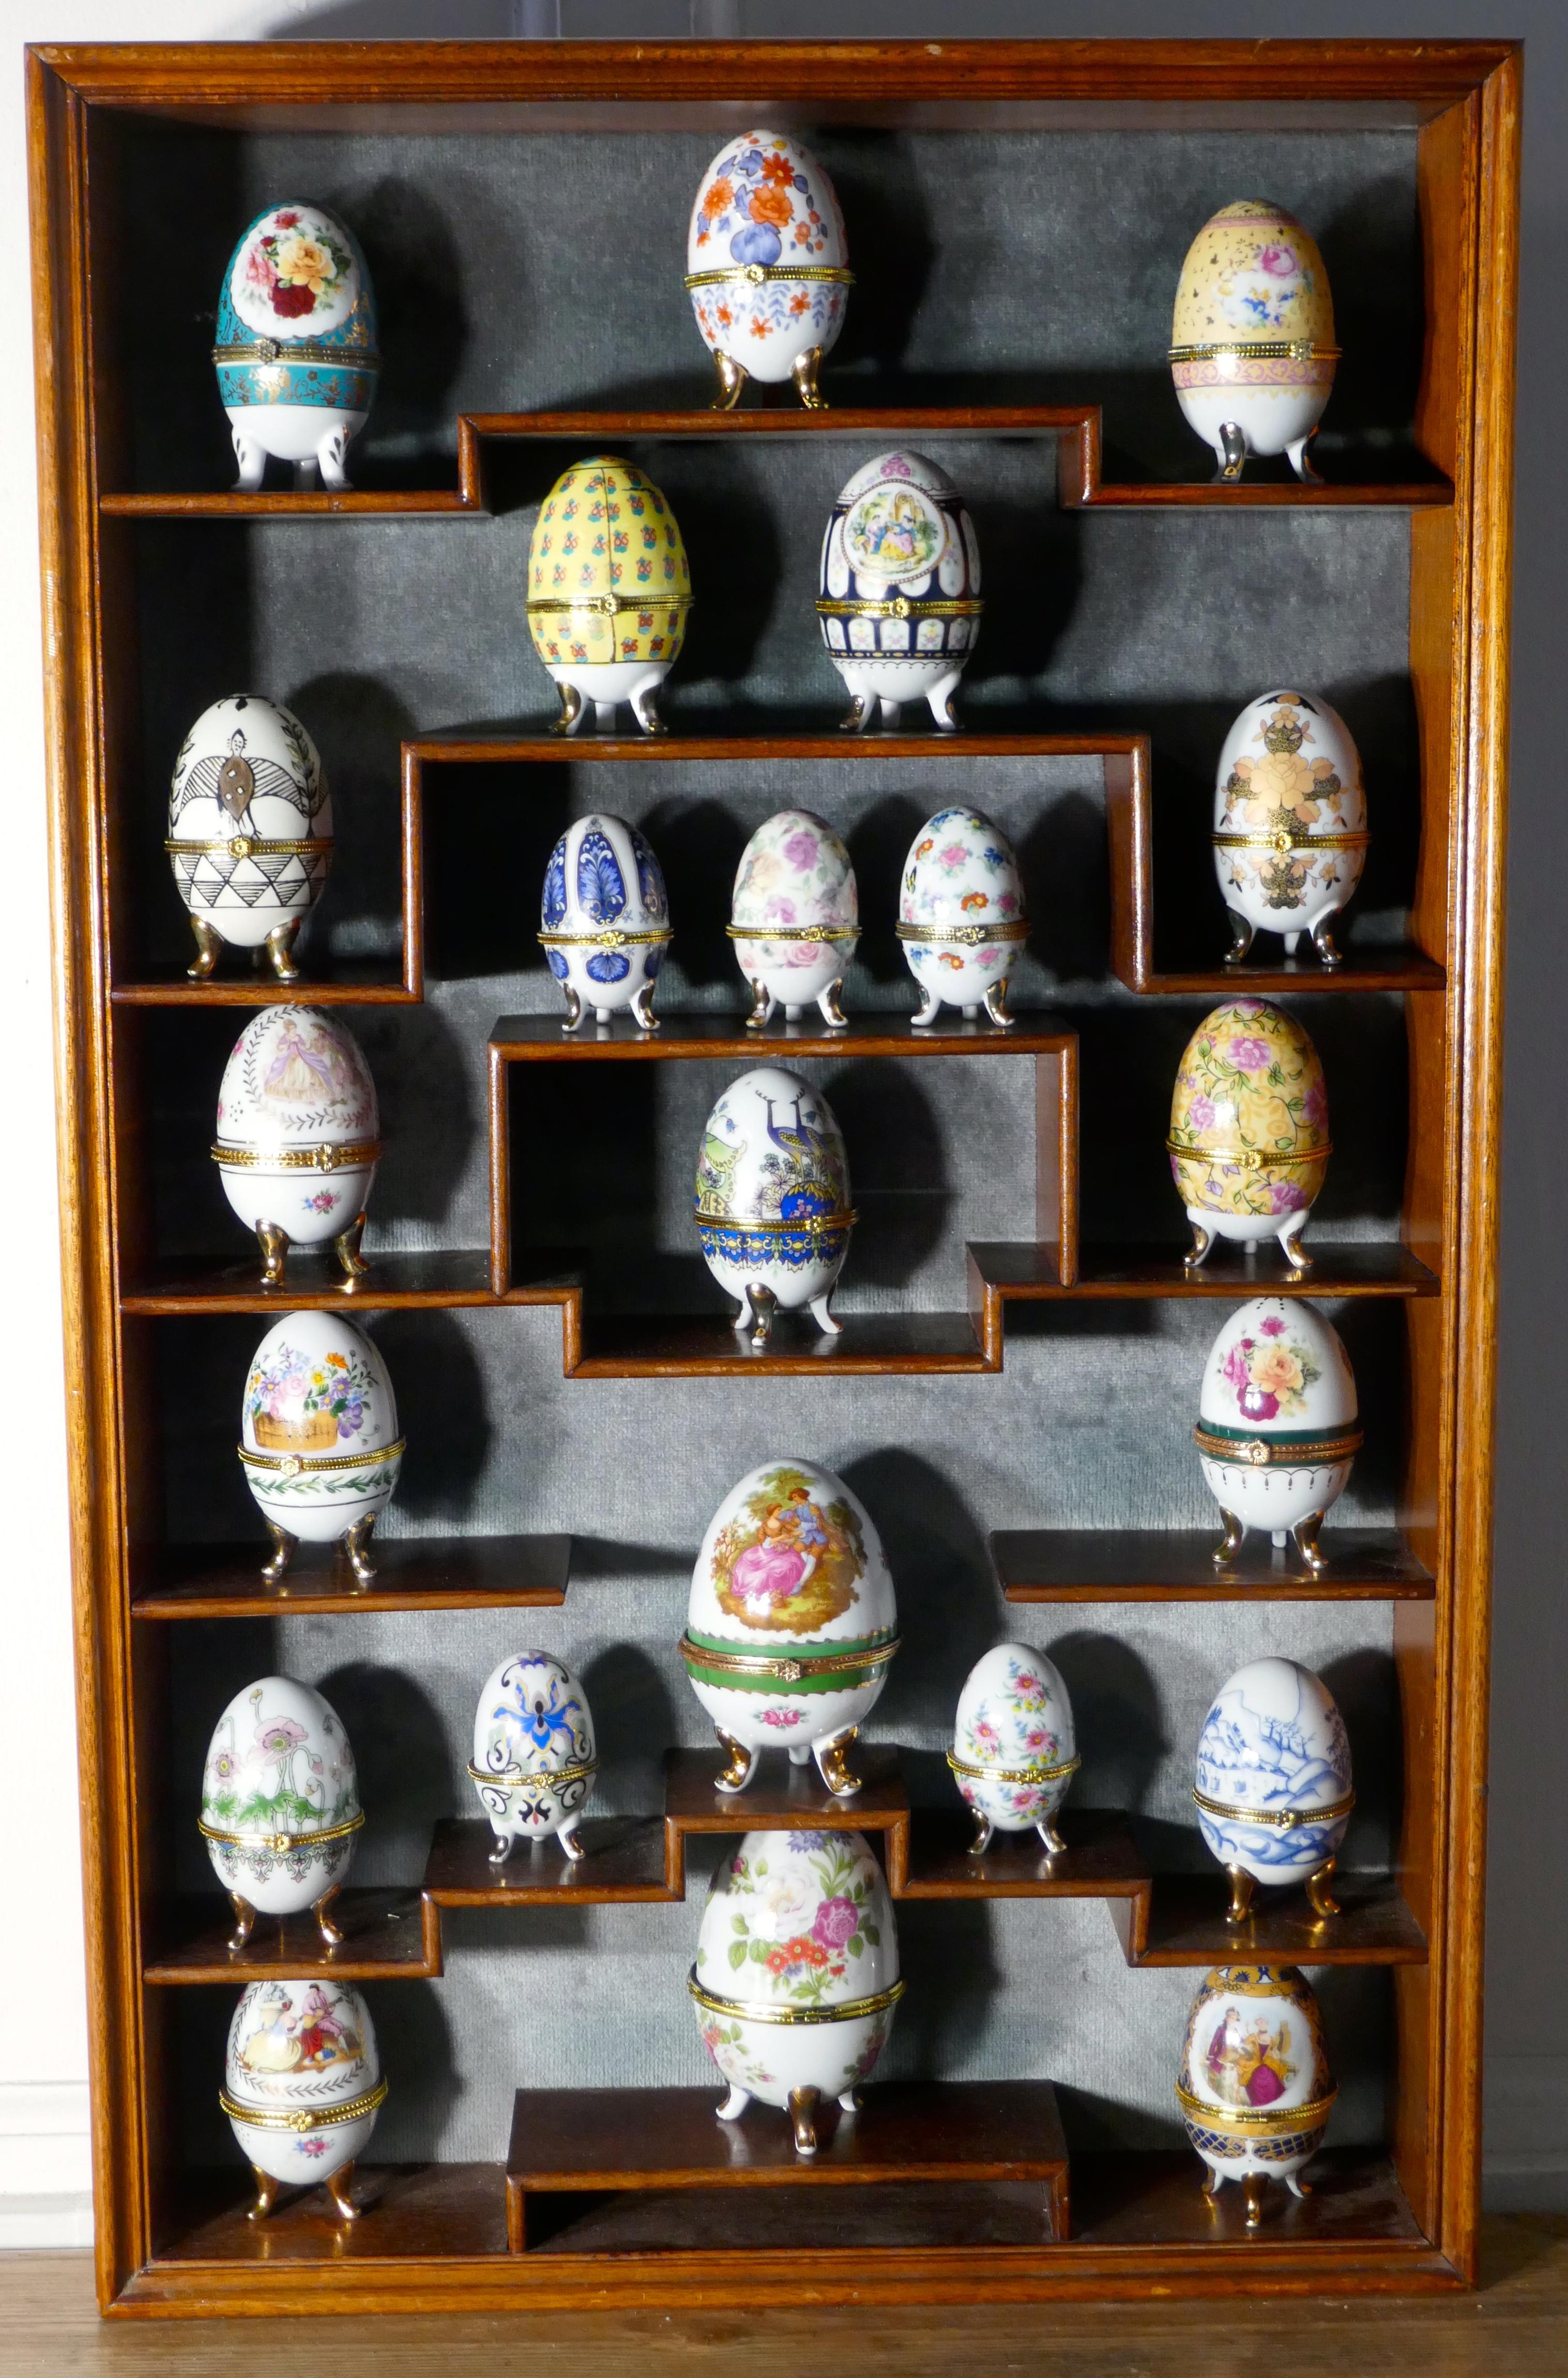 A collection of ceramic egg trinket boxes, in original Art Deco display shelf

This collection comes in its own wall hanging shelf unit, the shelf is made in mahogany with a blue velvet lining, the shelves are in the Odeon waterfall style all